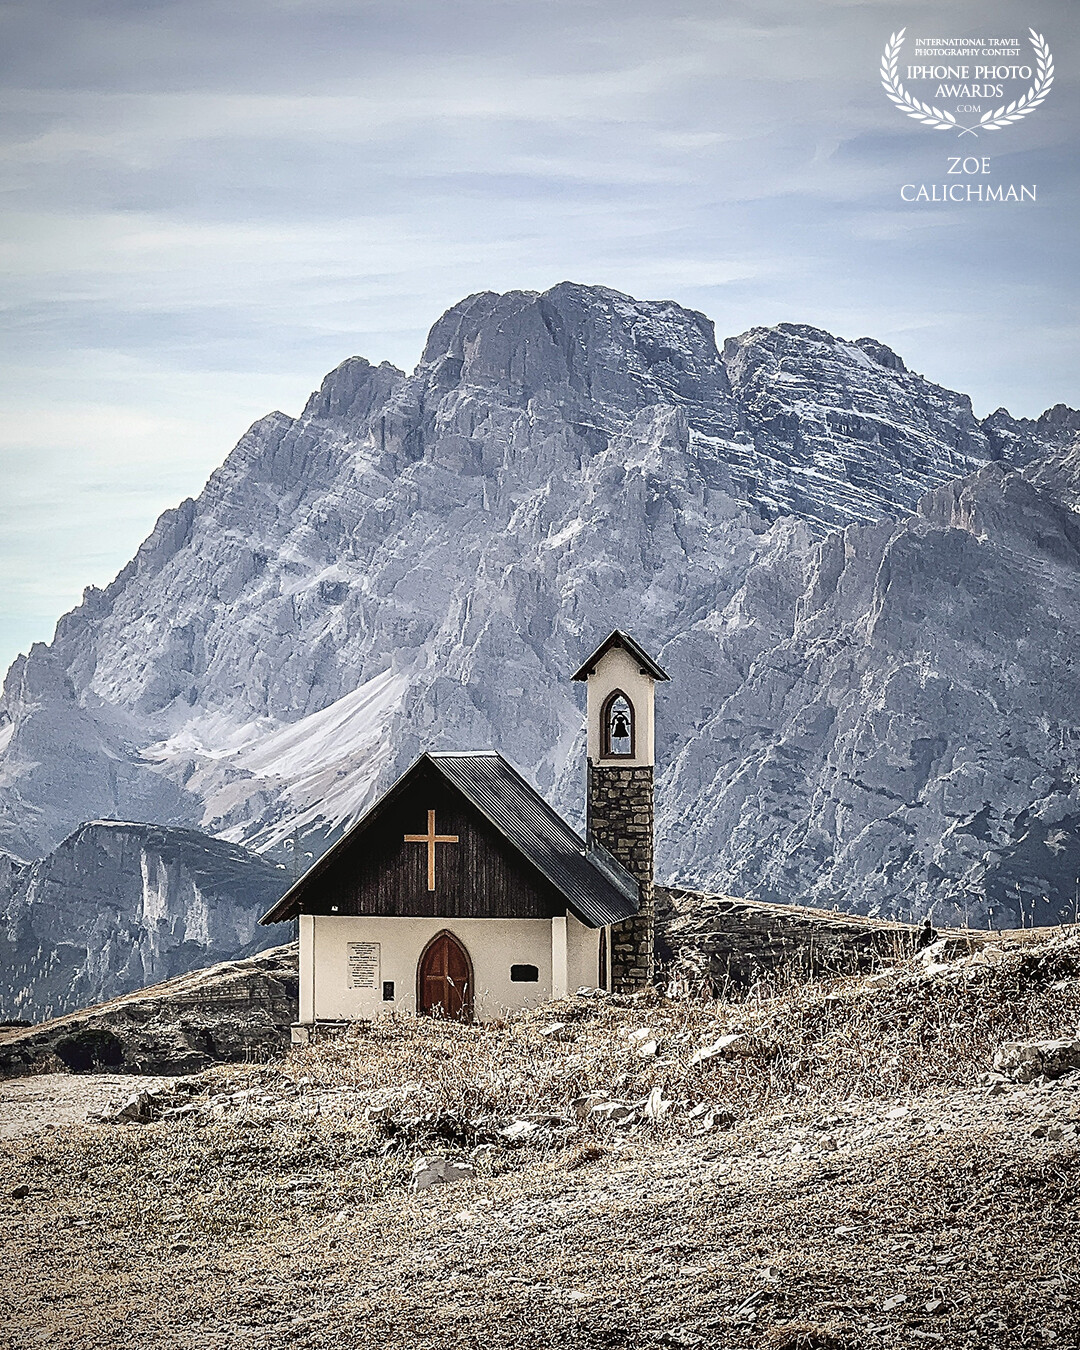 A tiny church in the Dolomites offering travelers a place to rest and reflect.